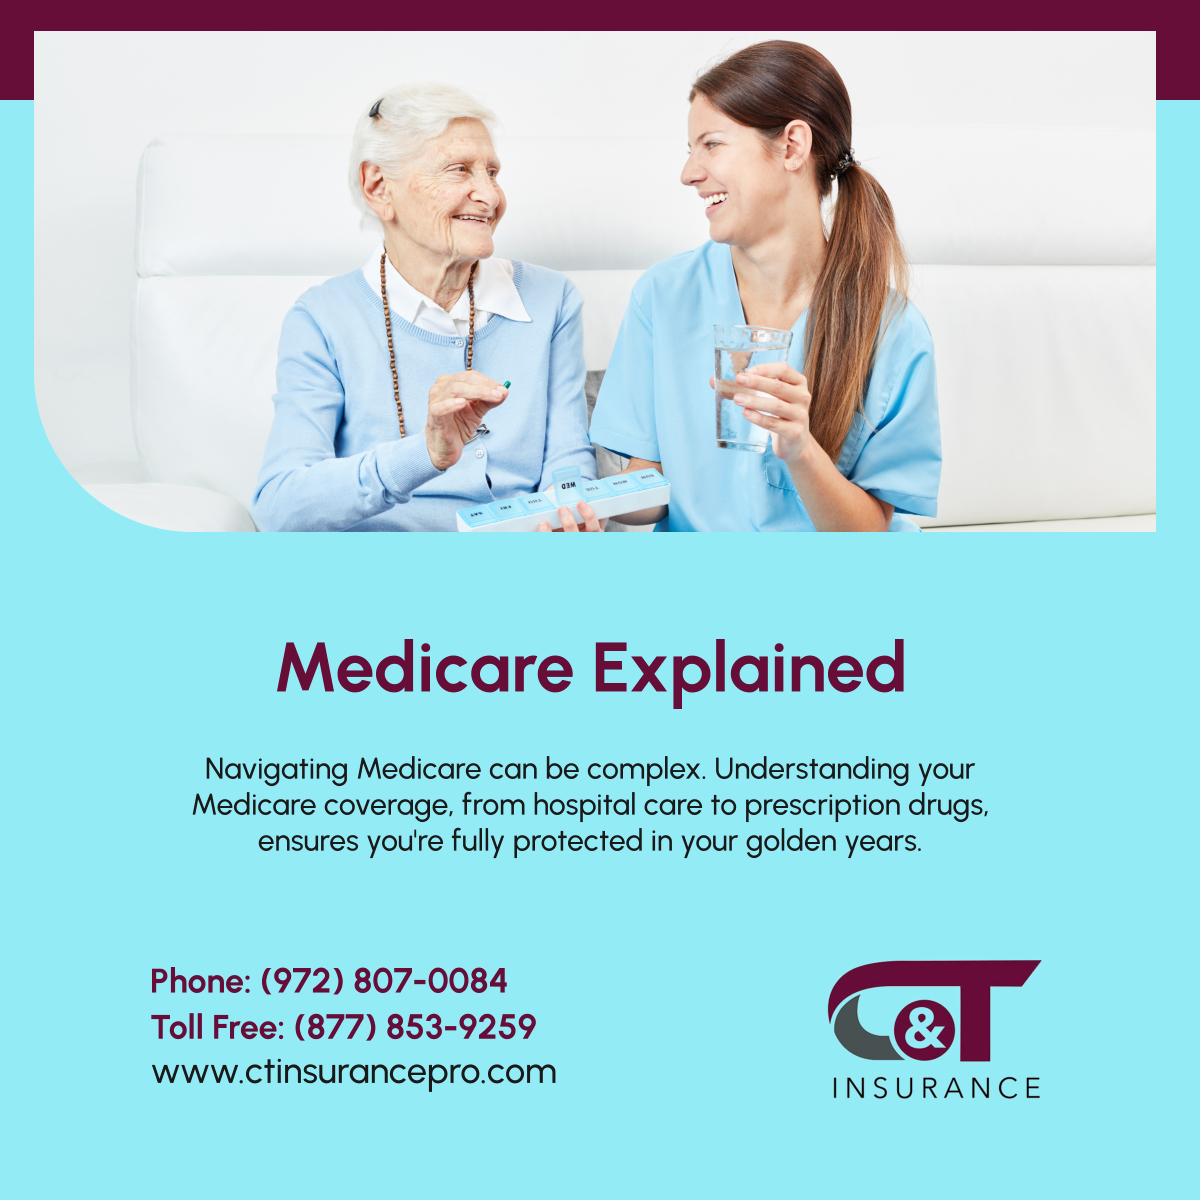 Explore Medicare options and find the coverage that fits your health needs. We're here to help every step of the way. 

#WylieTX #InsuranceServices #MedicareOptions